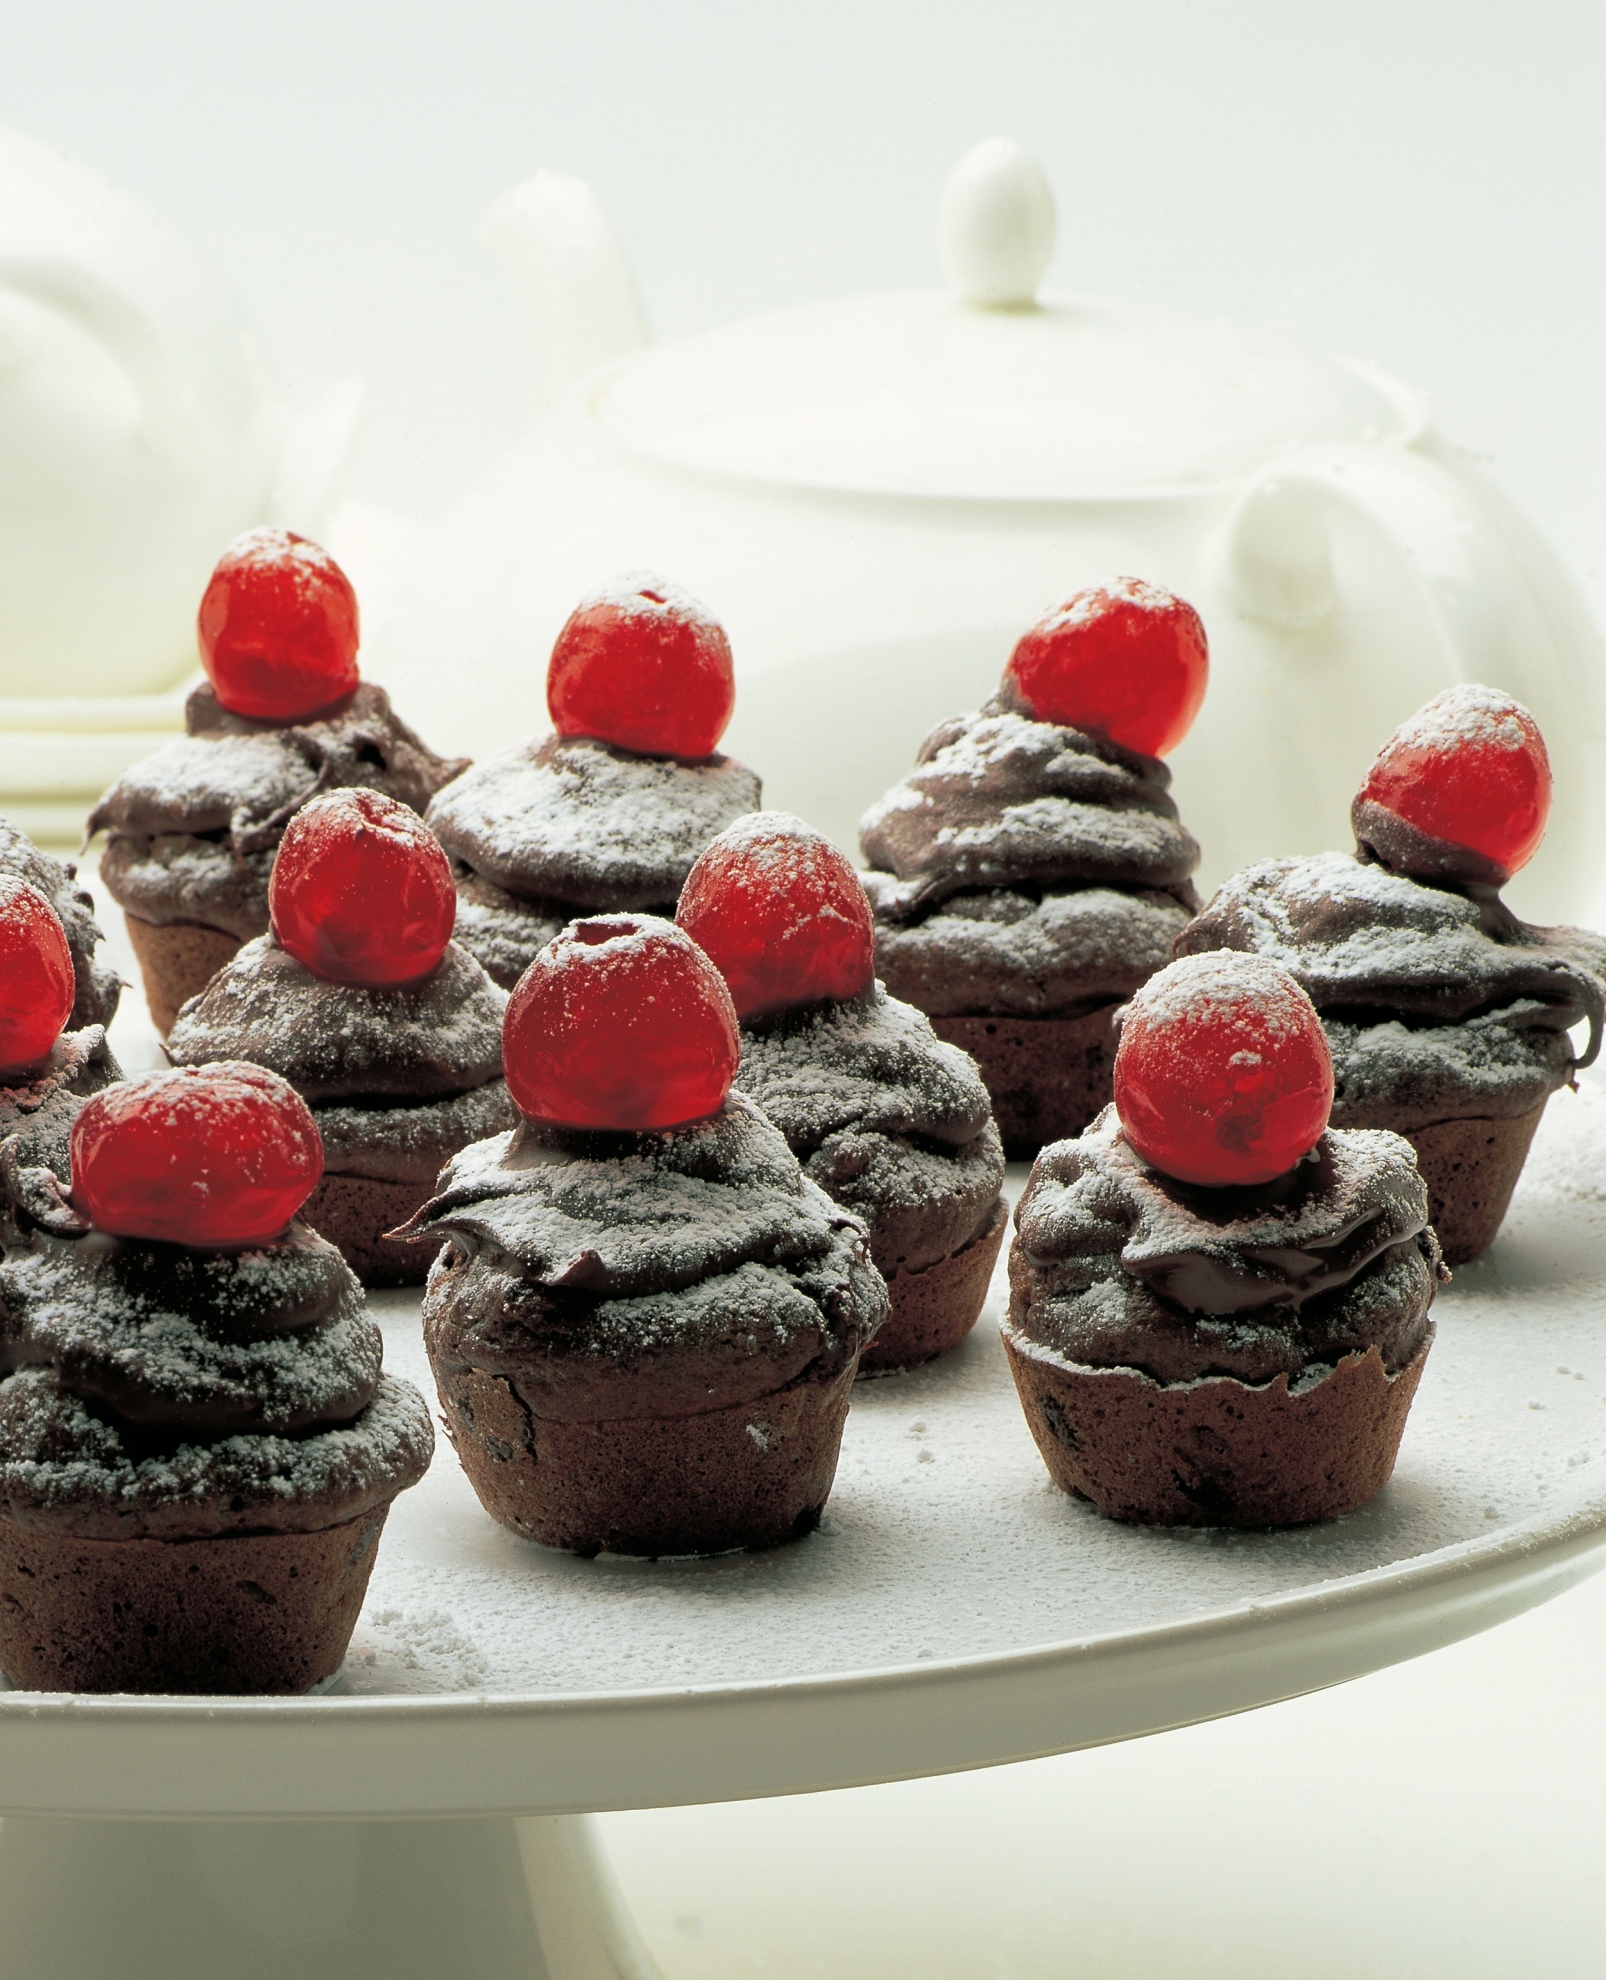 https://www.deliaonline.com/sites/default/files/quick_media/chocolate-chocolate-drop-mini-muffins-with-red-noses.jpg